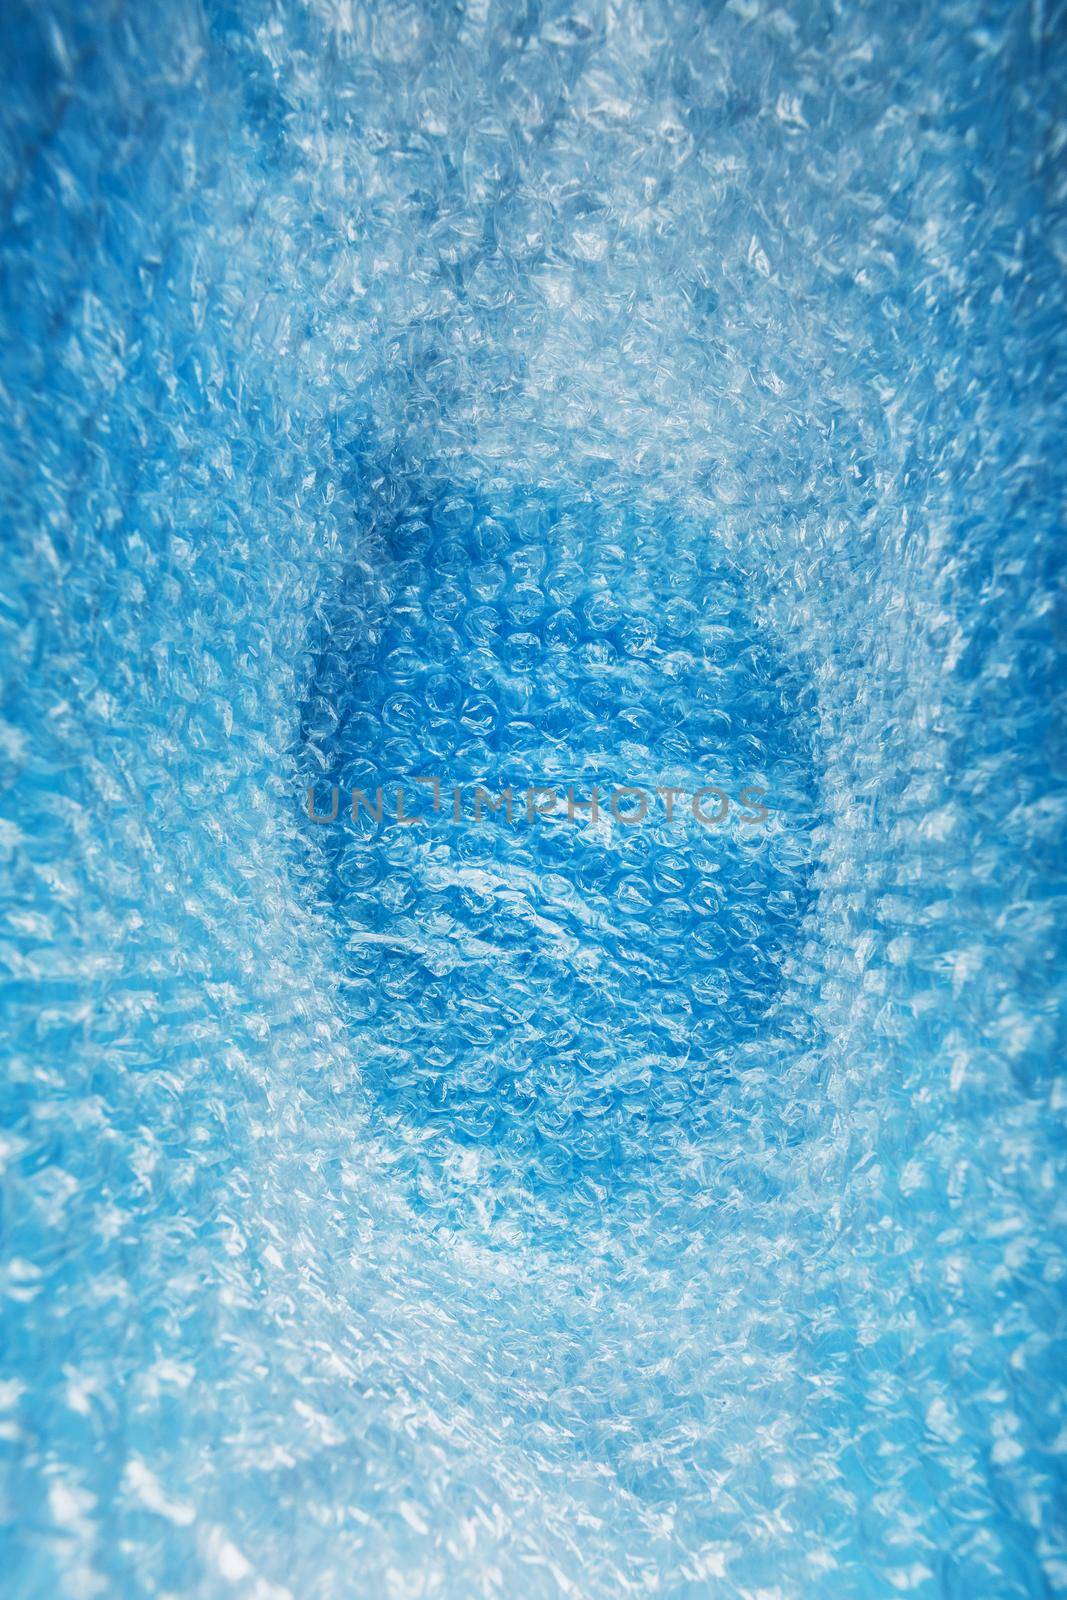 Inner space in a bag of packaging air-bubble film on a blue background in full screen by AlexGrec